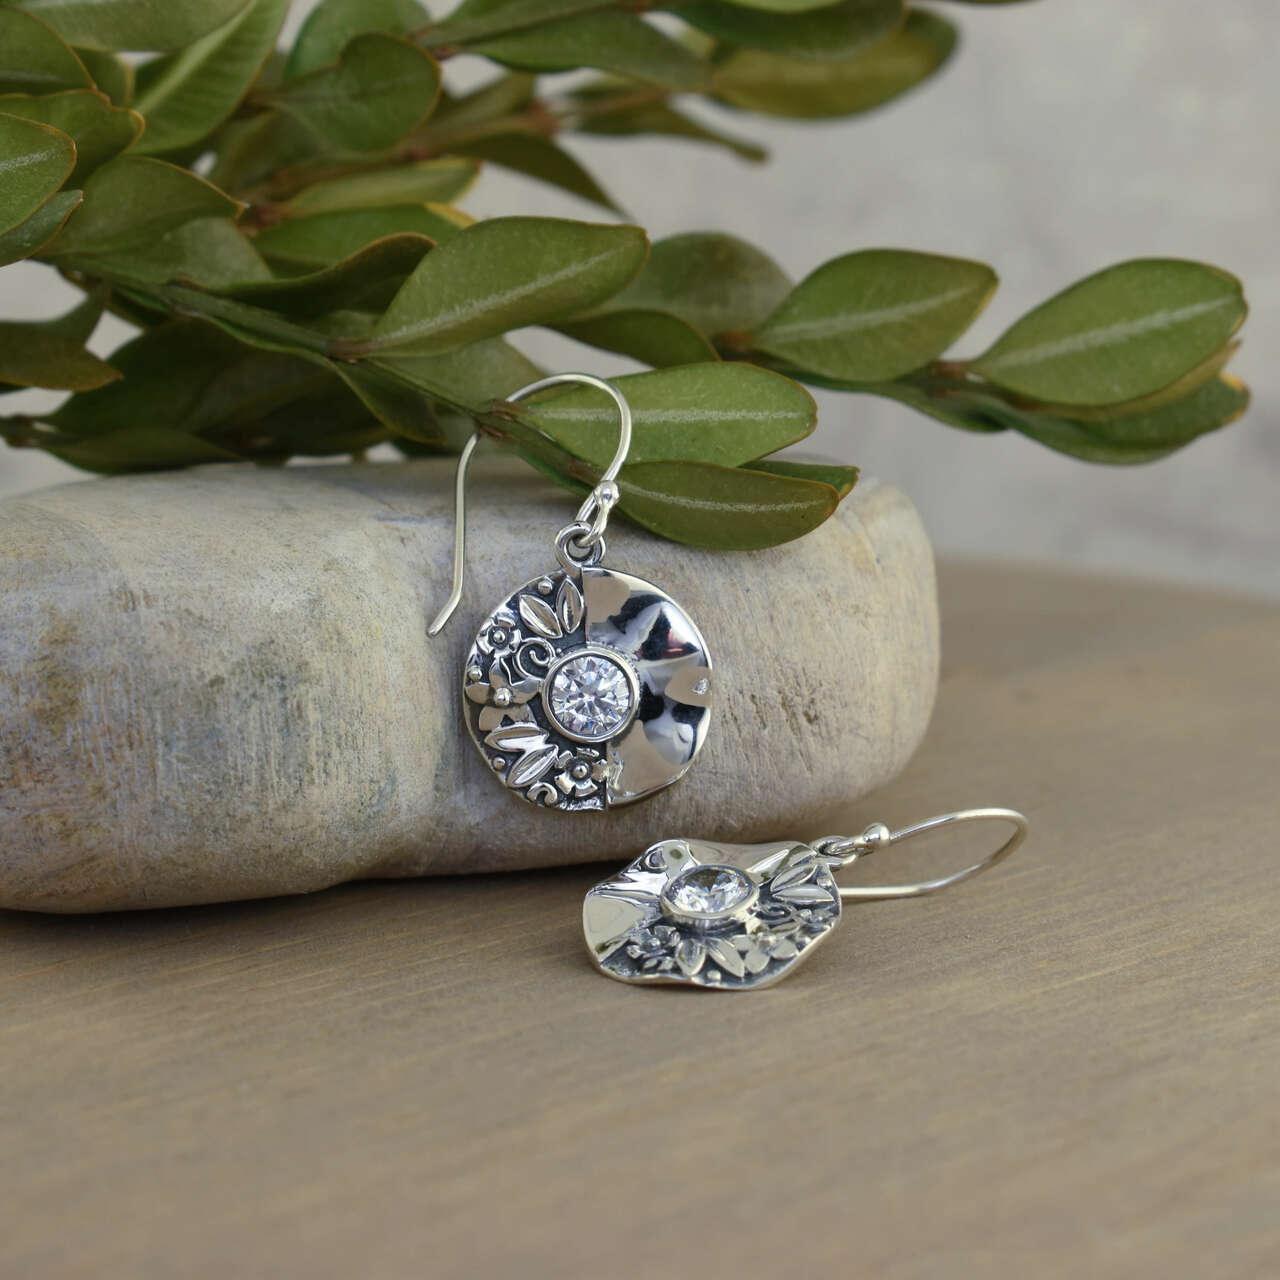 Shiny sterling silver earrings with CZ